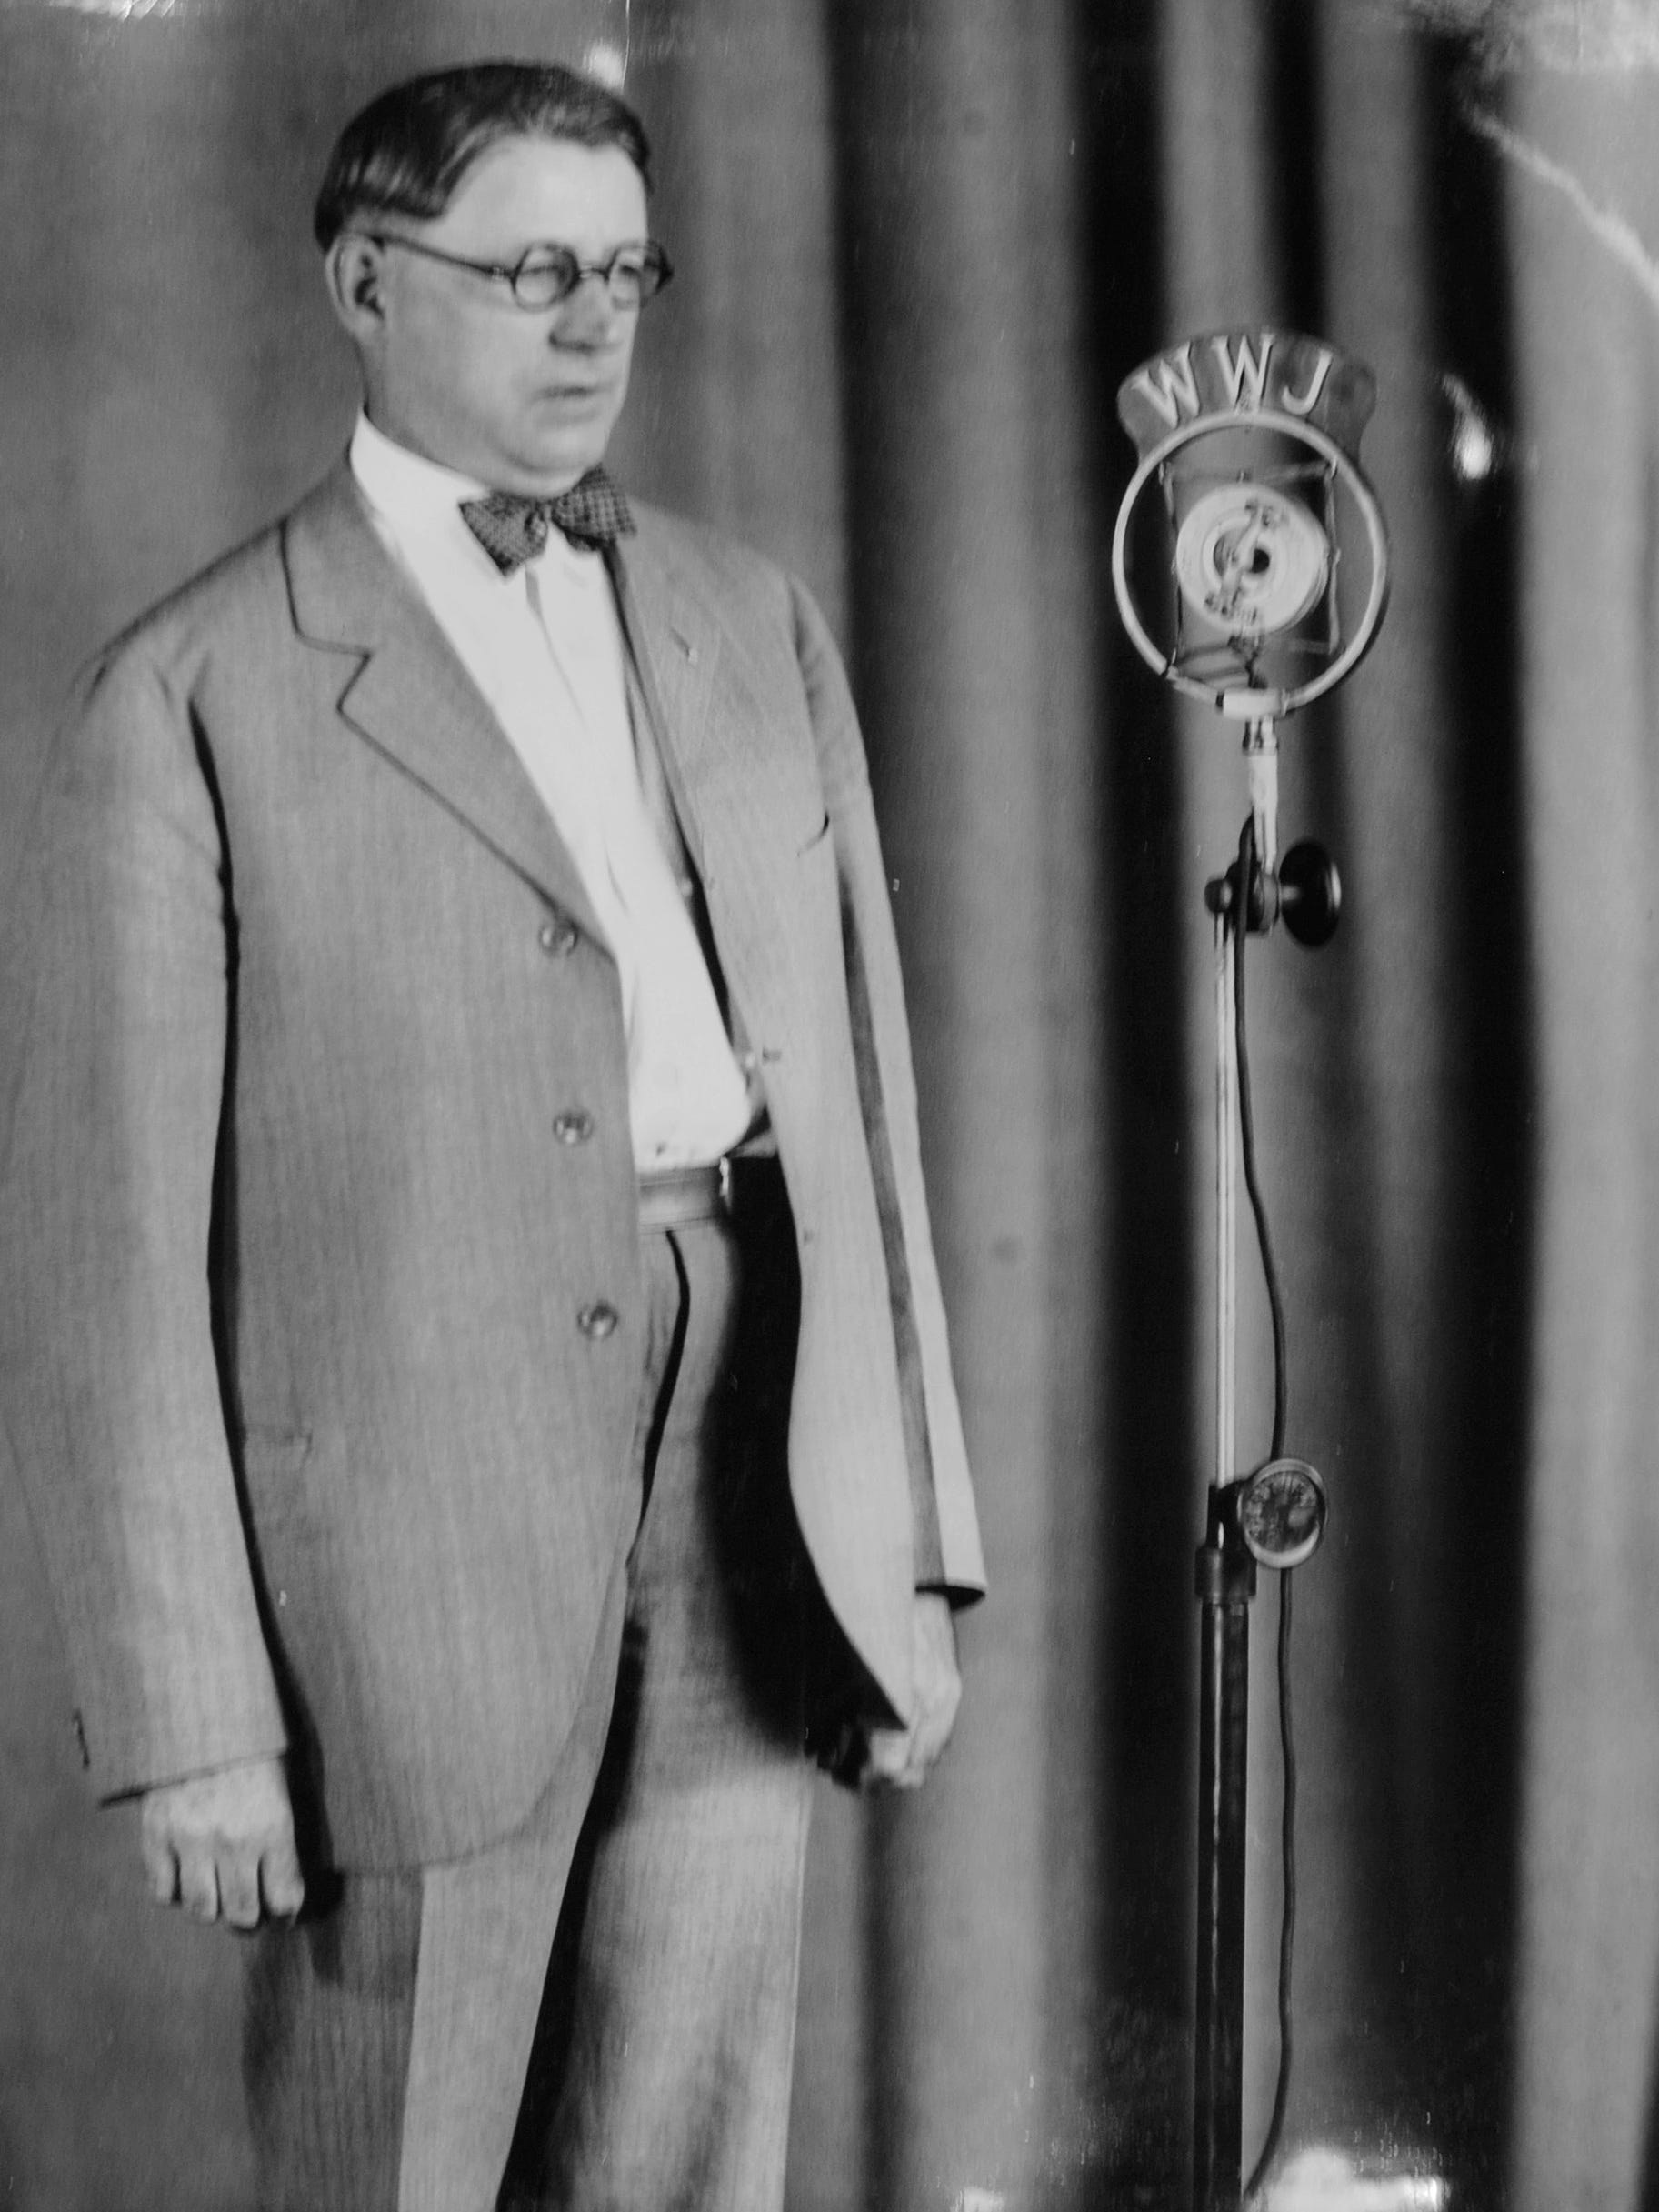 Detroit Mayor Charles Bowles made the first political speech over WWJ's airwaves.  Seen here on July 12, 1930, he was fighting a recall election just six months after he had taken office.  While he had campaigned as an anti-crime reformer, he fired the police commissioner after the latter had ordered a series of raids. The outraged electorate booted him out of office.